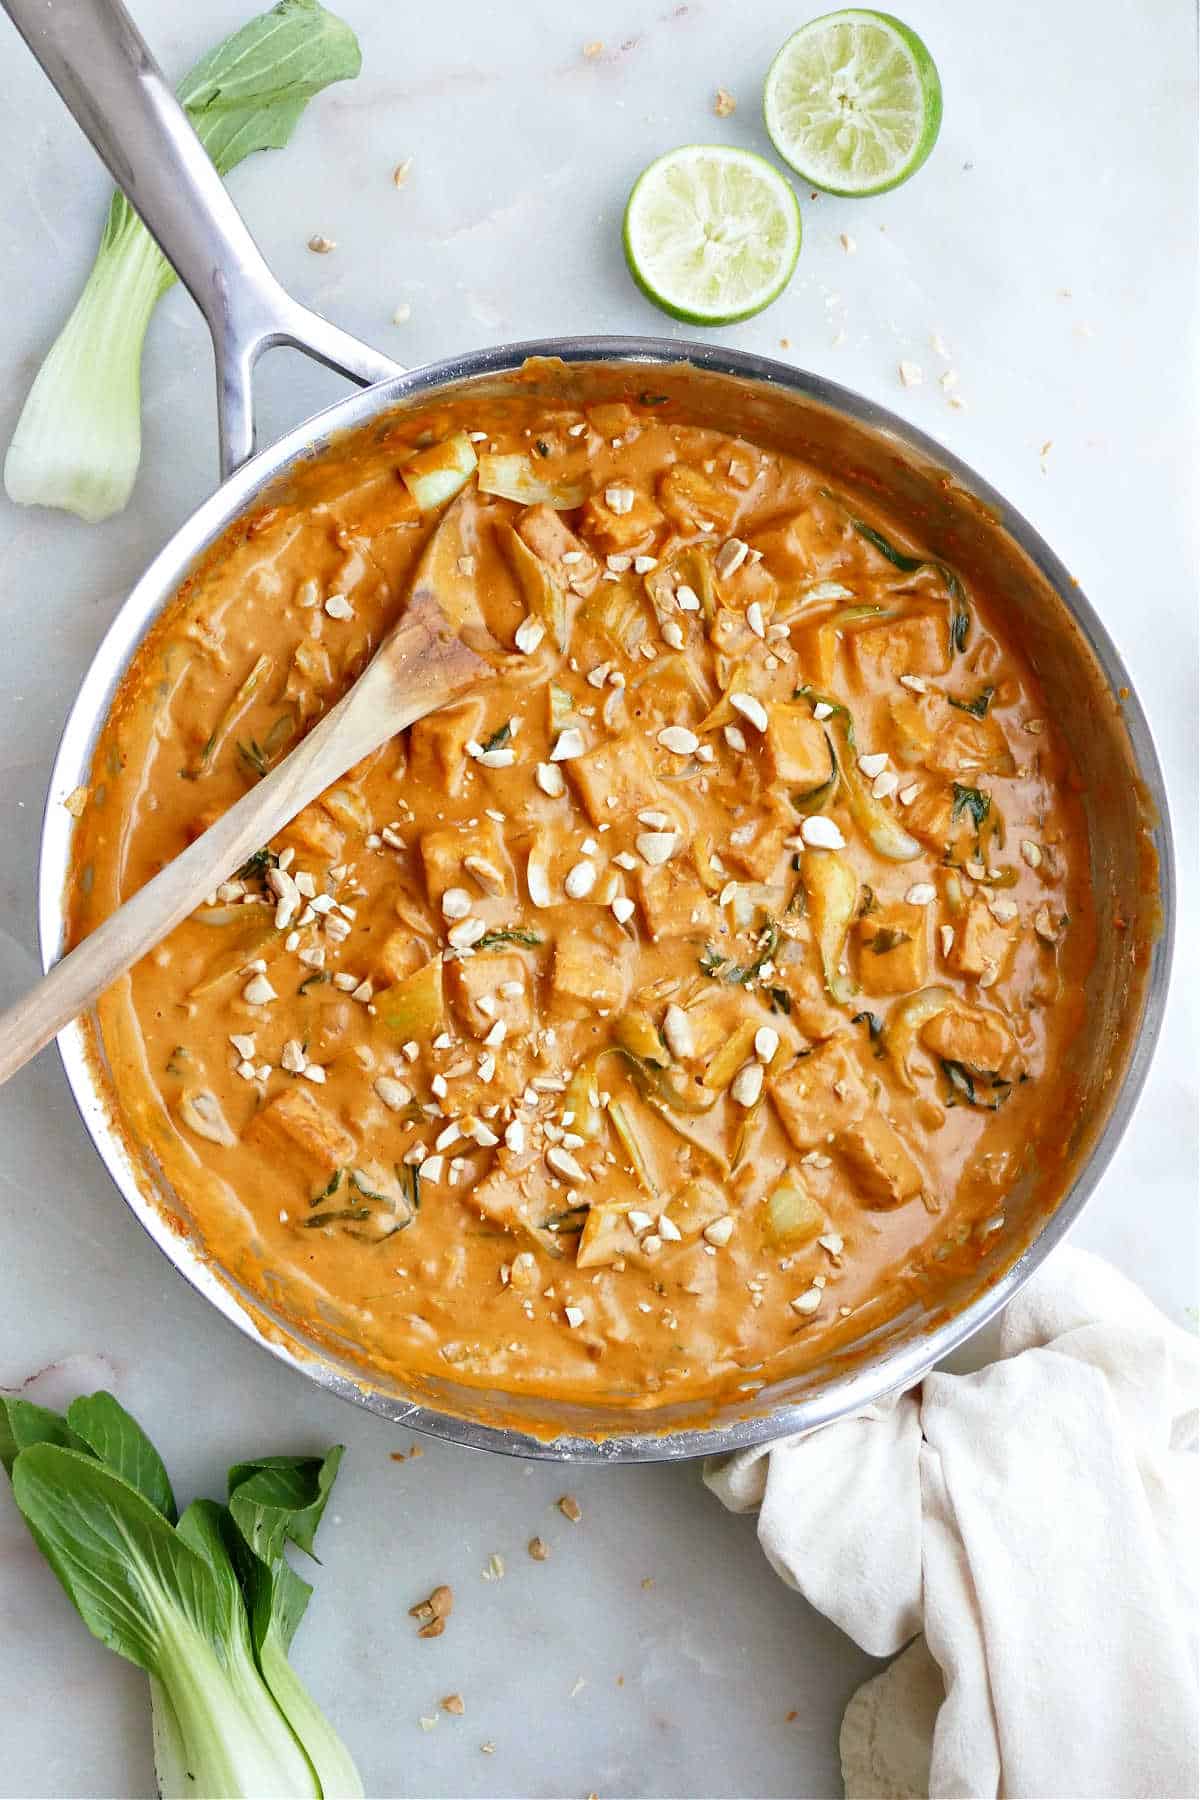 Peanut butter tofu made with coconut milk in a large skillet with wooden spoon.